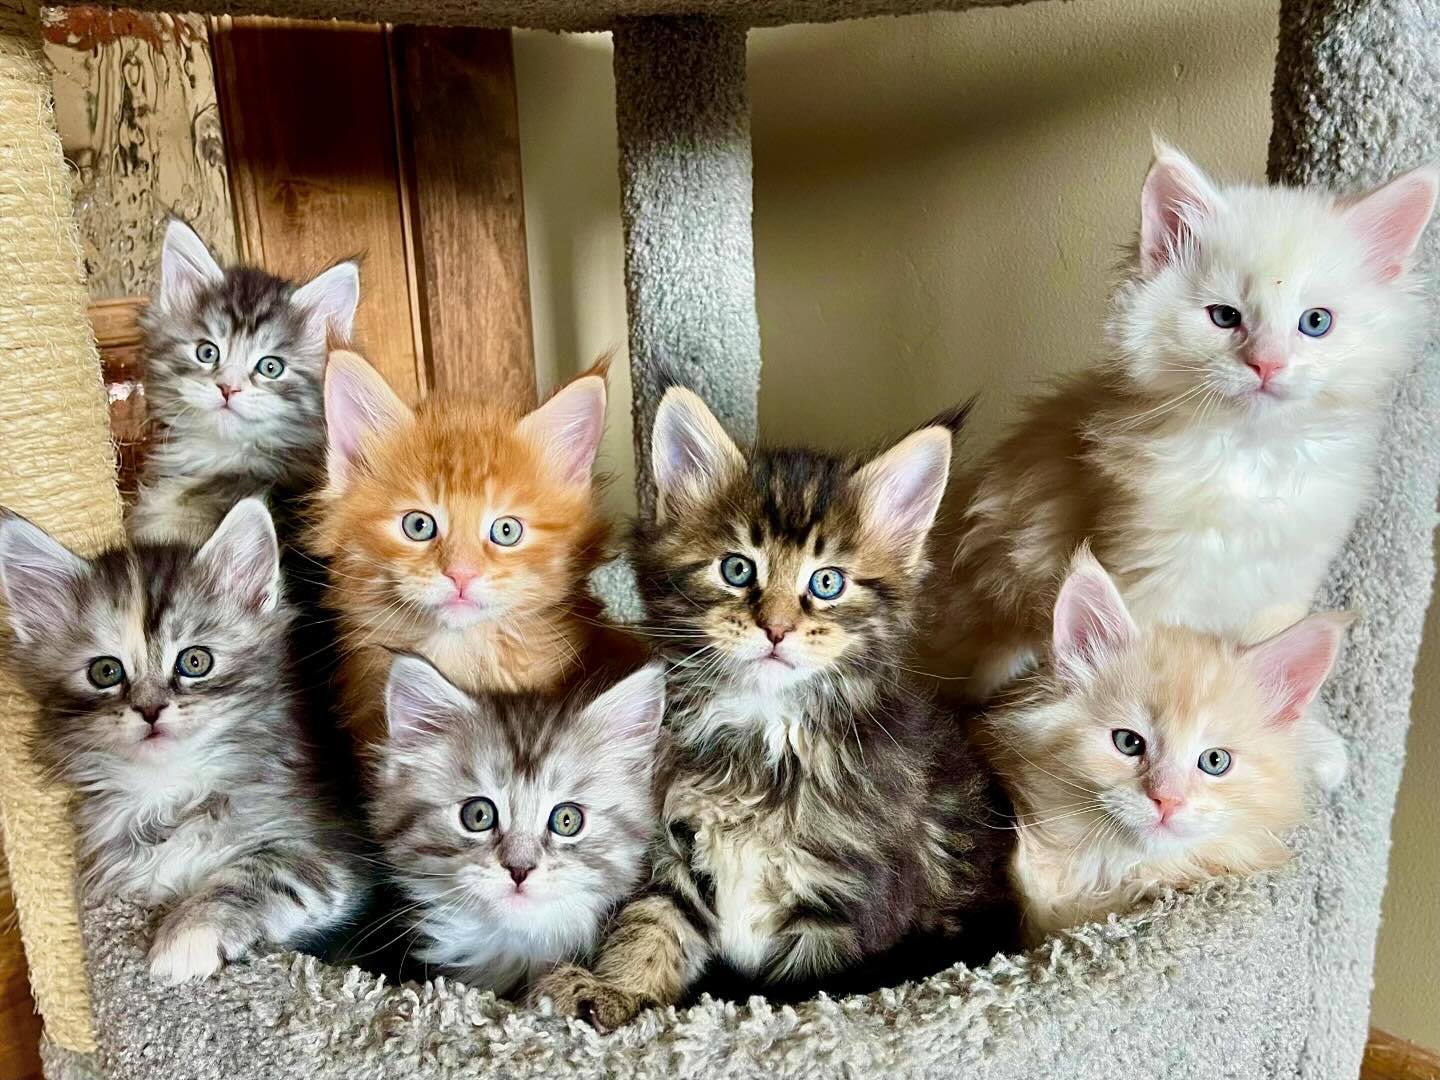 ✨SIX WEEKS OLD✨
&bull;
We can hardly stand how quickly they are growing up!
&bull;
#mainecoon #mainecoons #mainecooncat #mainecoonlovers #bigcats #largecat #kitten #kittens #kittensofinstagram #mainecoonkitten #cat #catlover #catlife #litter #kittenl